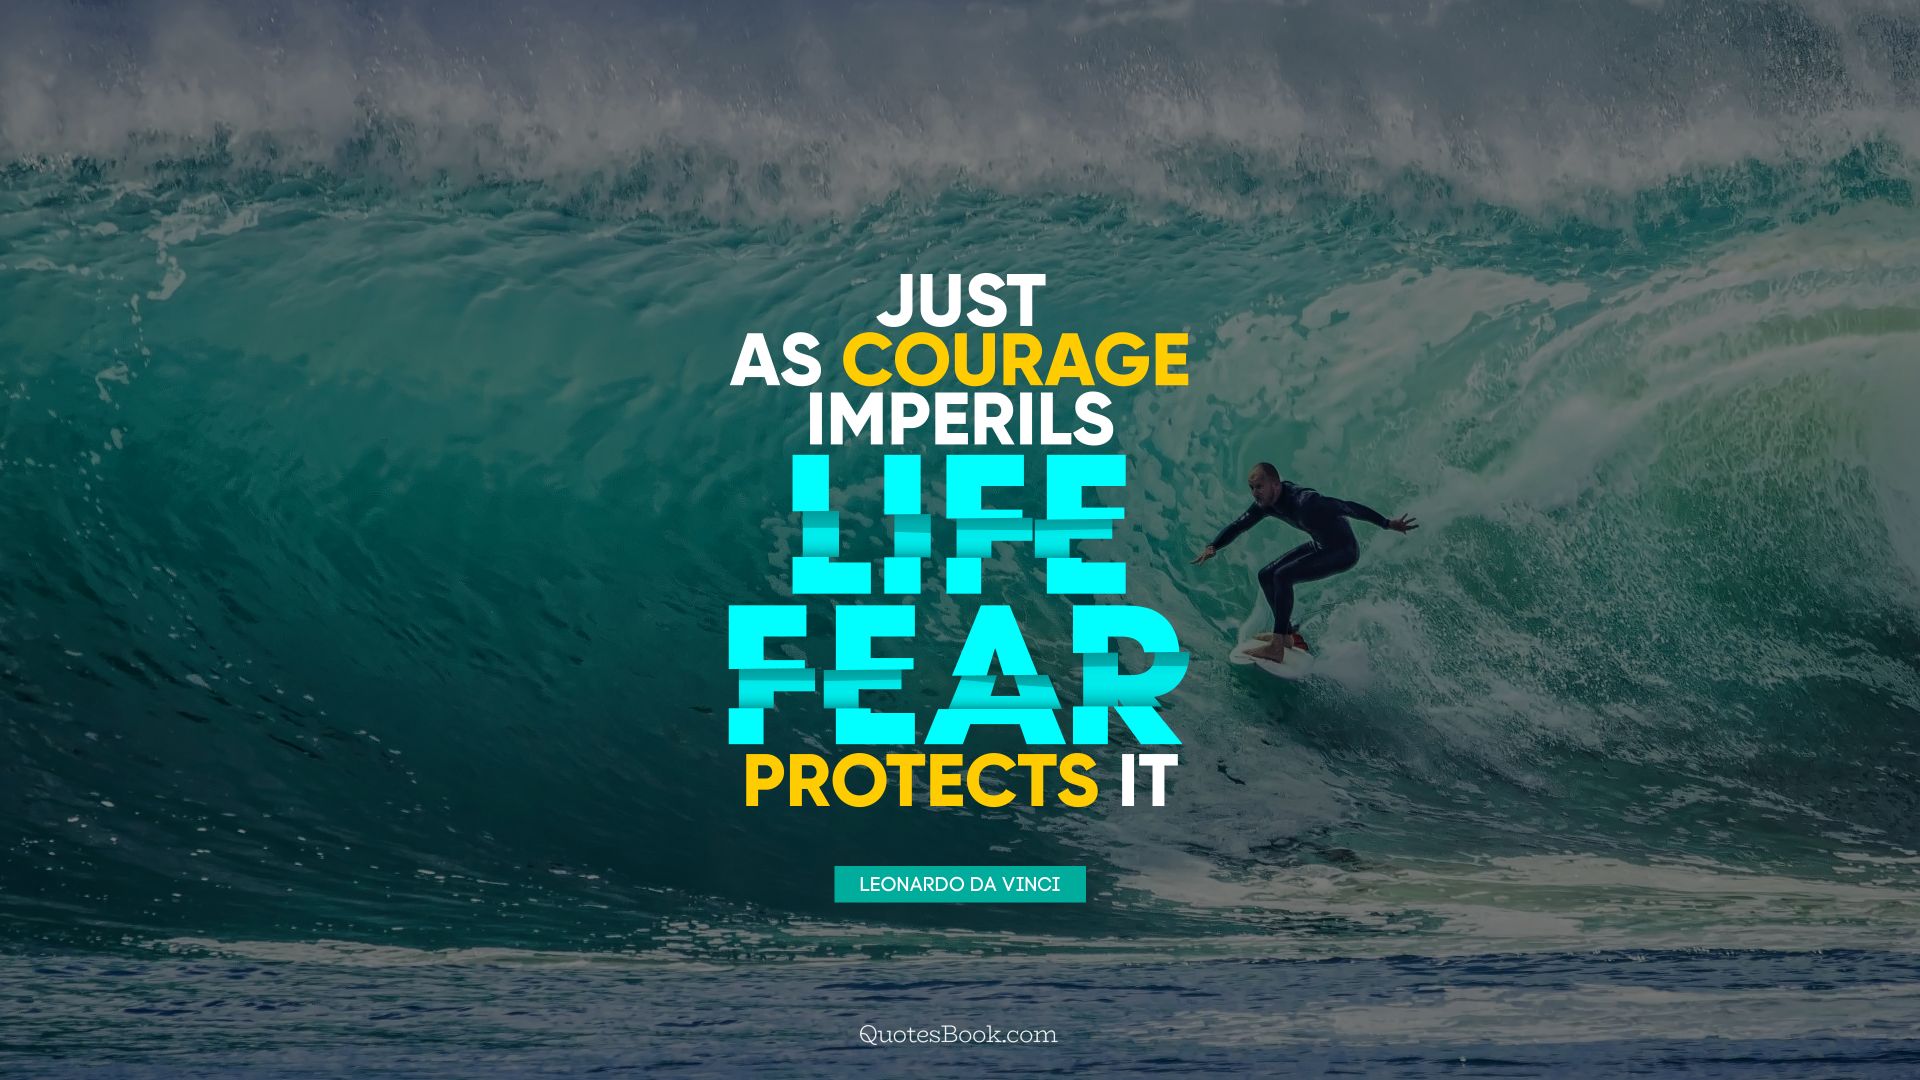 Just as courage imperils life, fear protects it. - Quote by Leonardo da Vinci